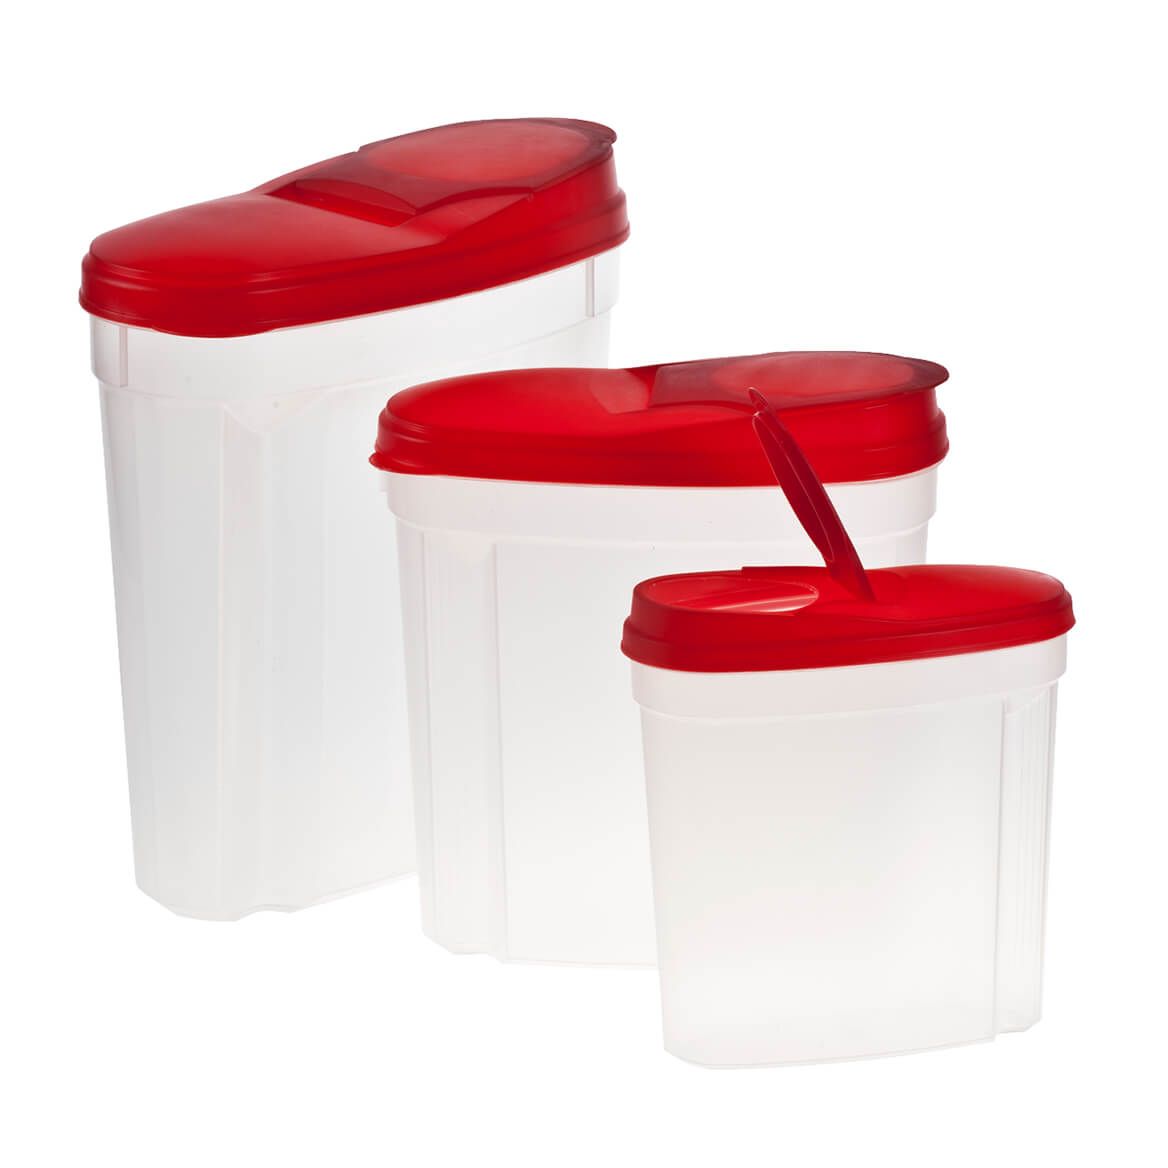 Pour and Store Plastic Dispensers, Set of 3 + '-' + 356146